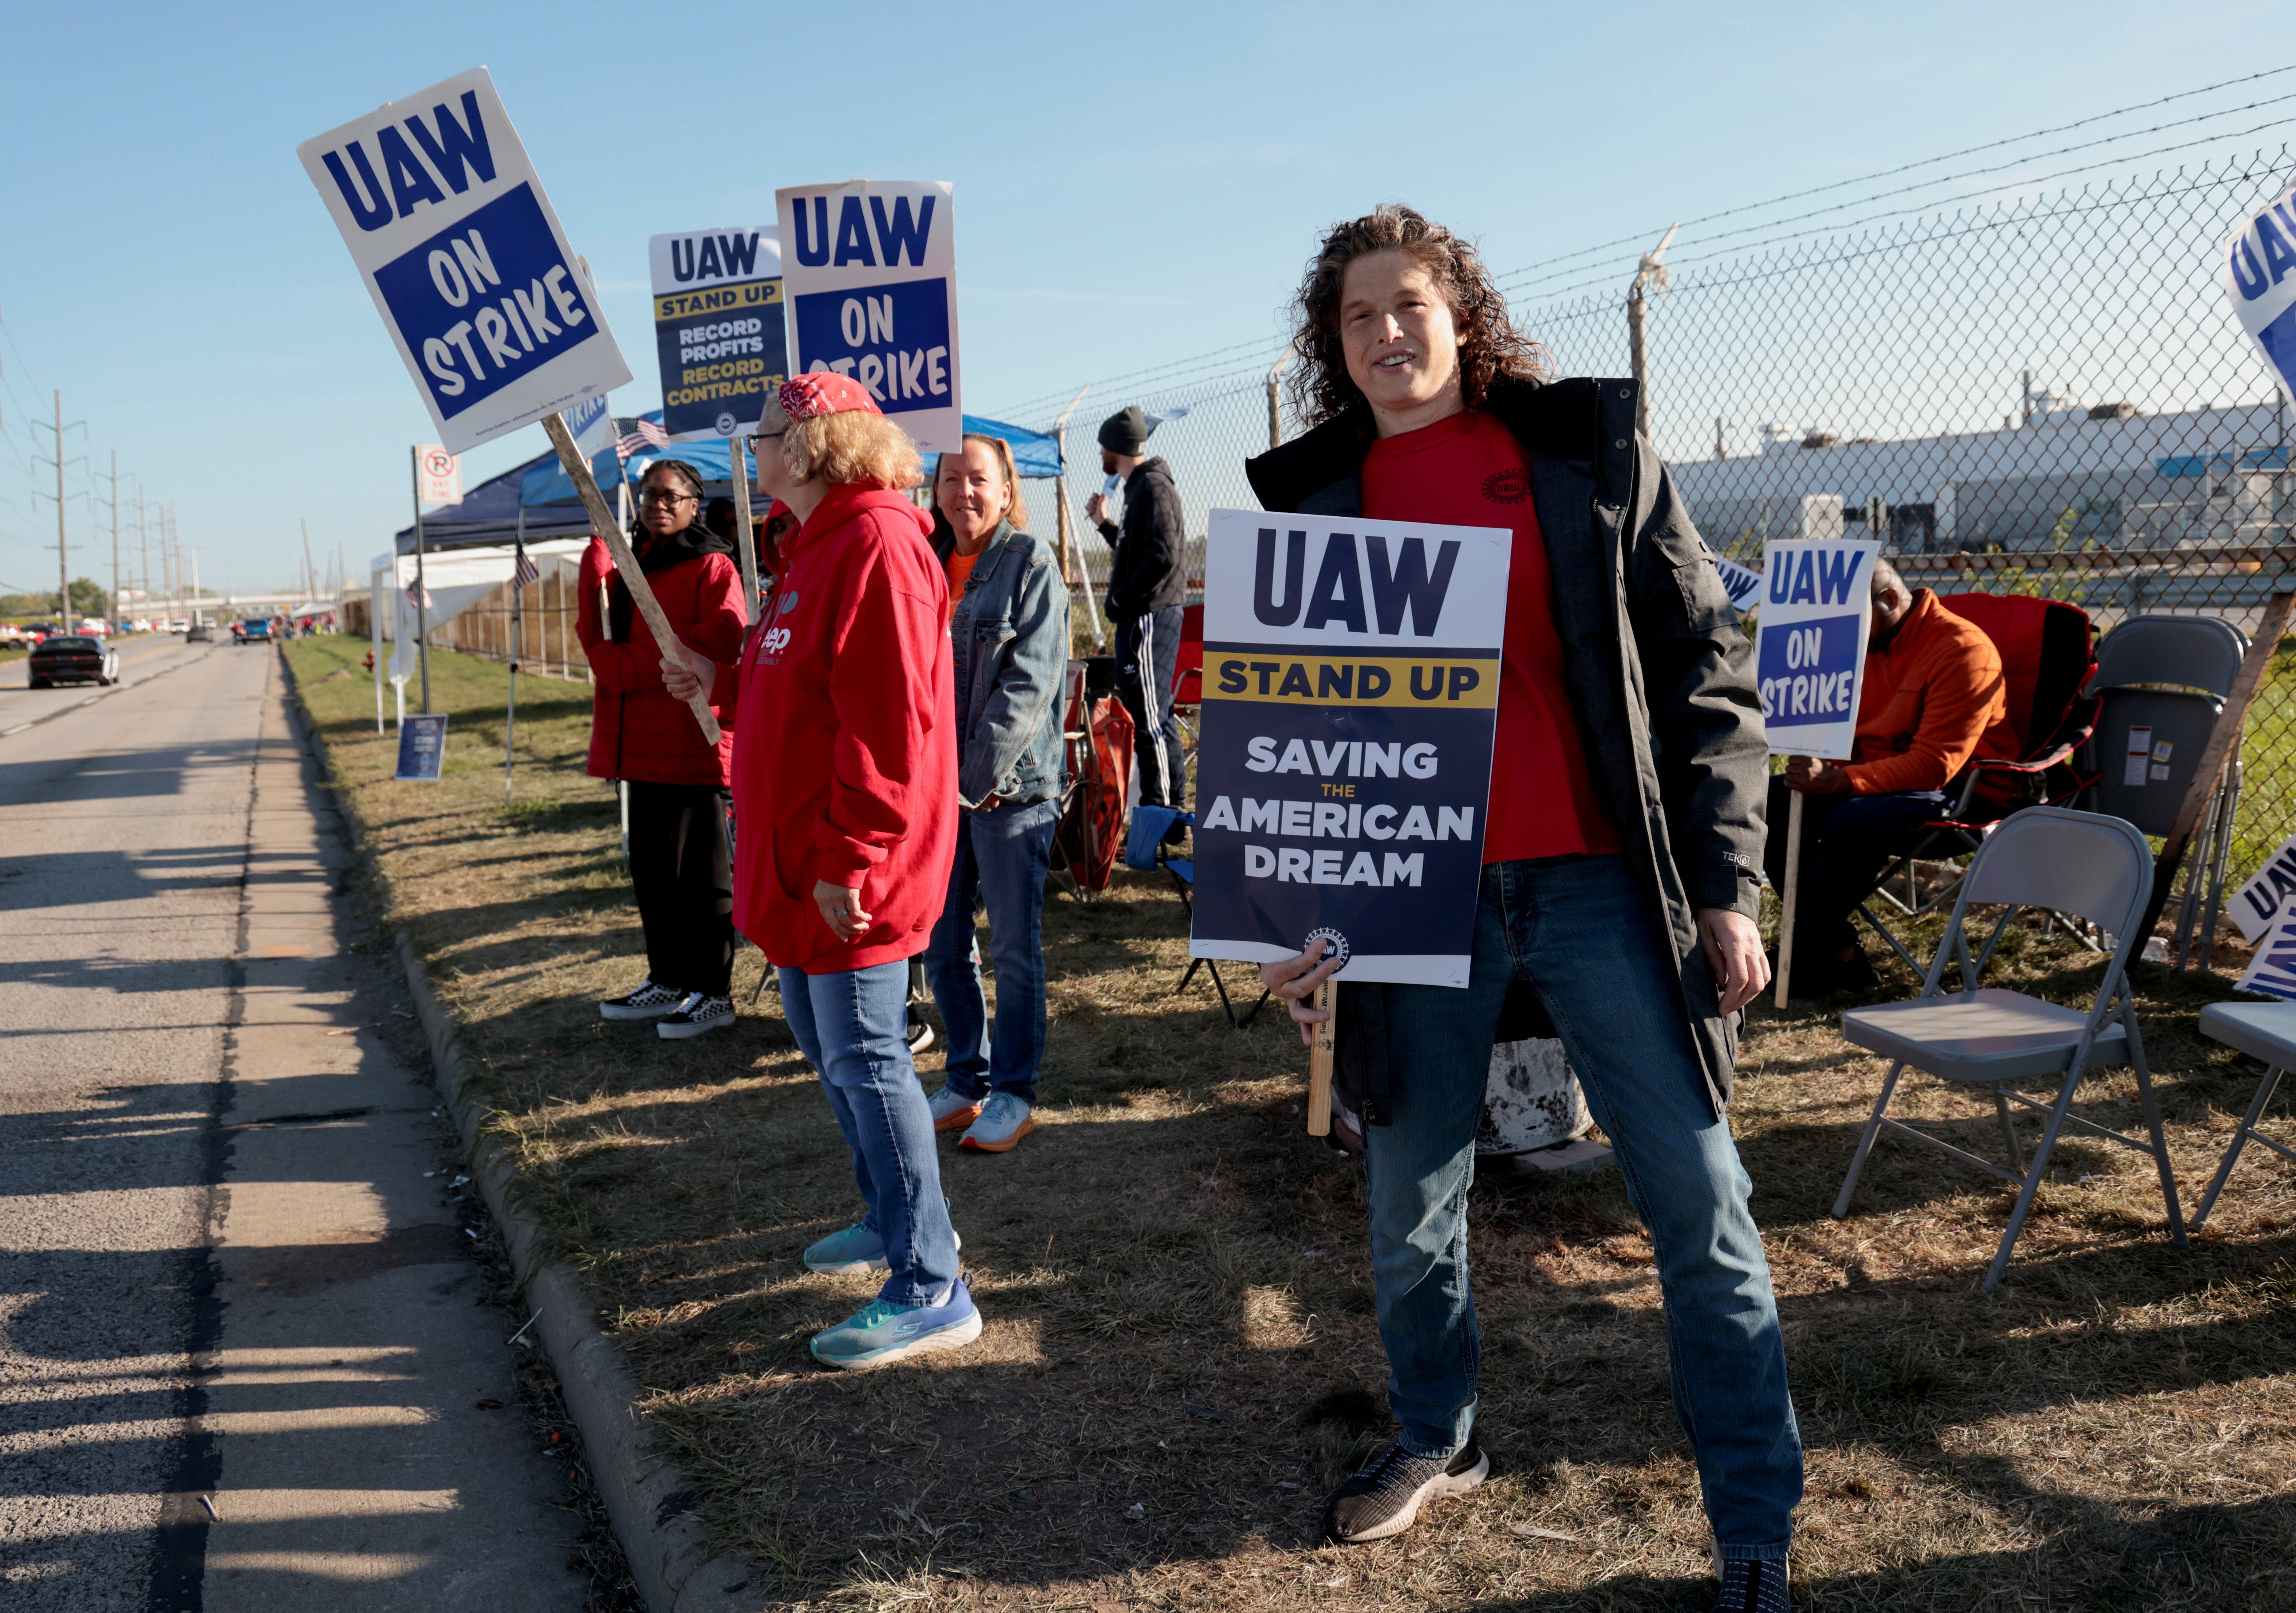 United Auto Workers strike sign outside the Stellantis Jeep plant in Toledo, Ohio on 19 September.